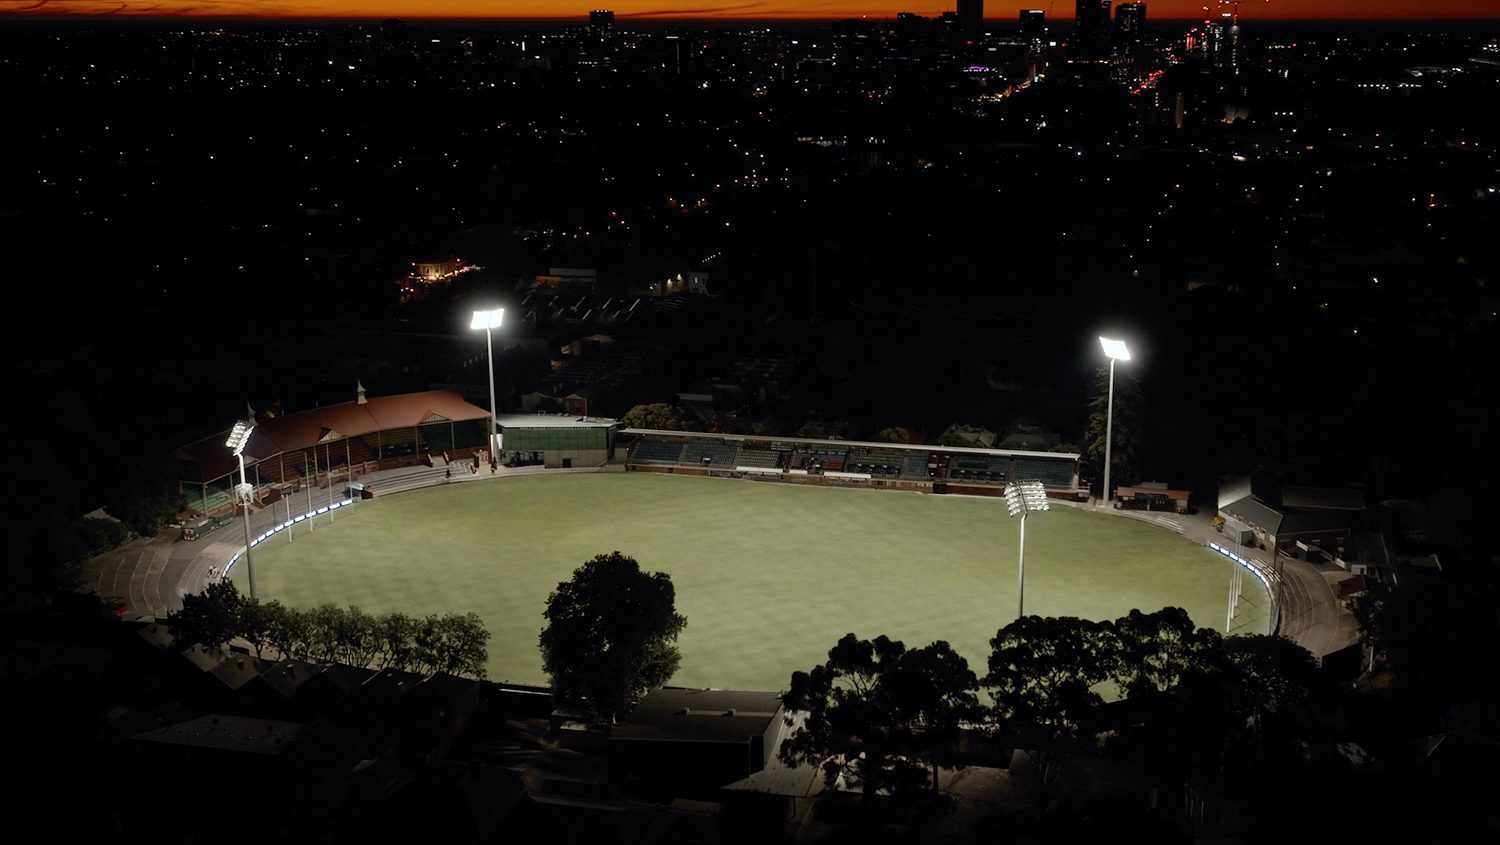 VAILO LED Lighting lights up Norwood Oval in Adelaide, South Australia